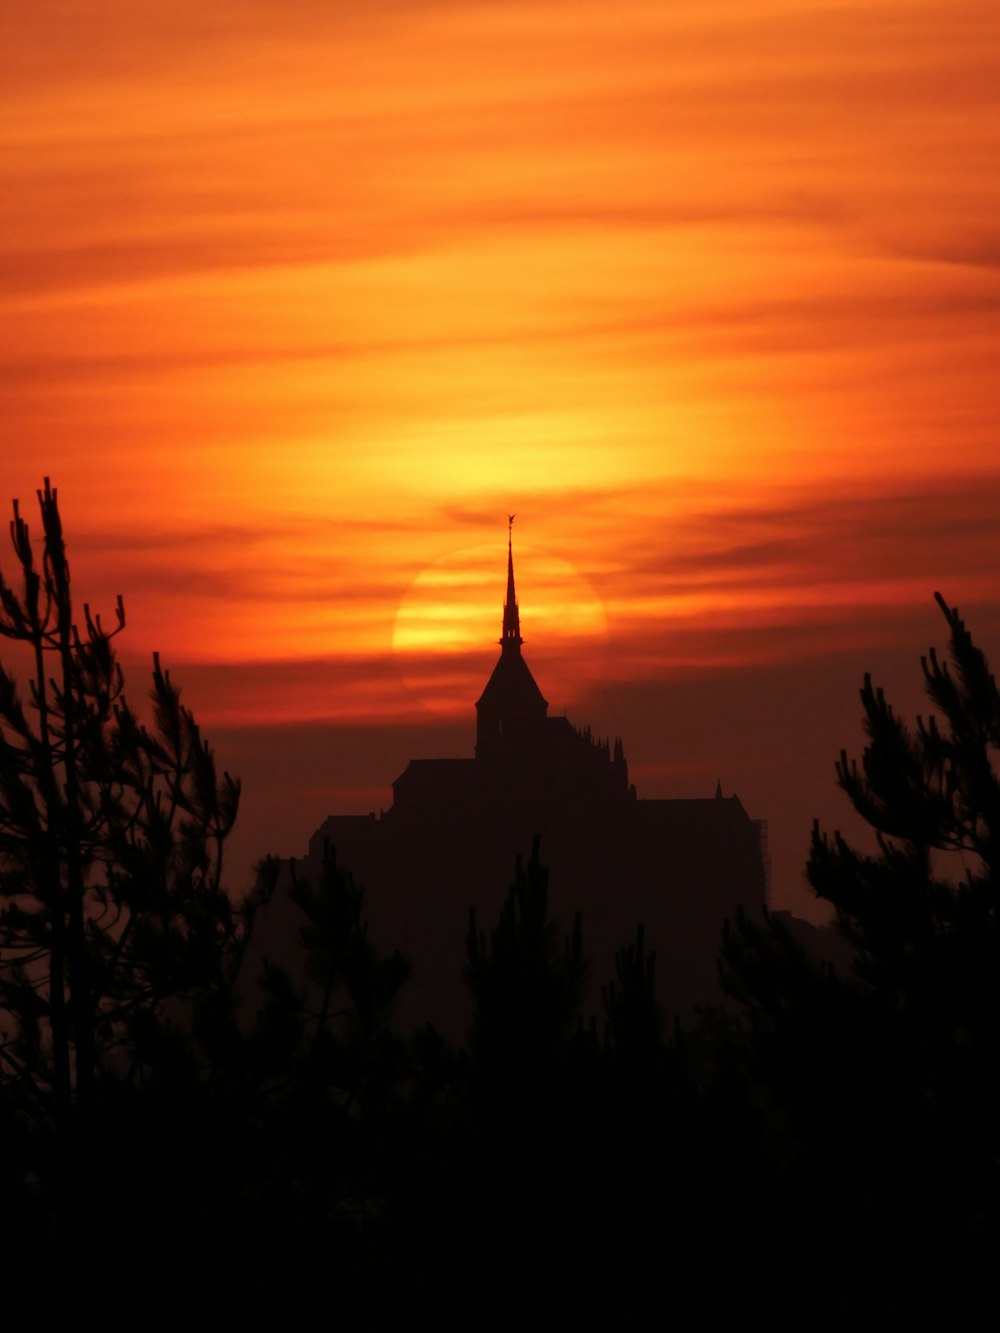 the sun is setting behind a building with a spire